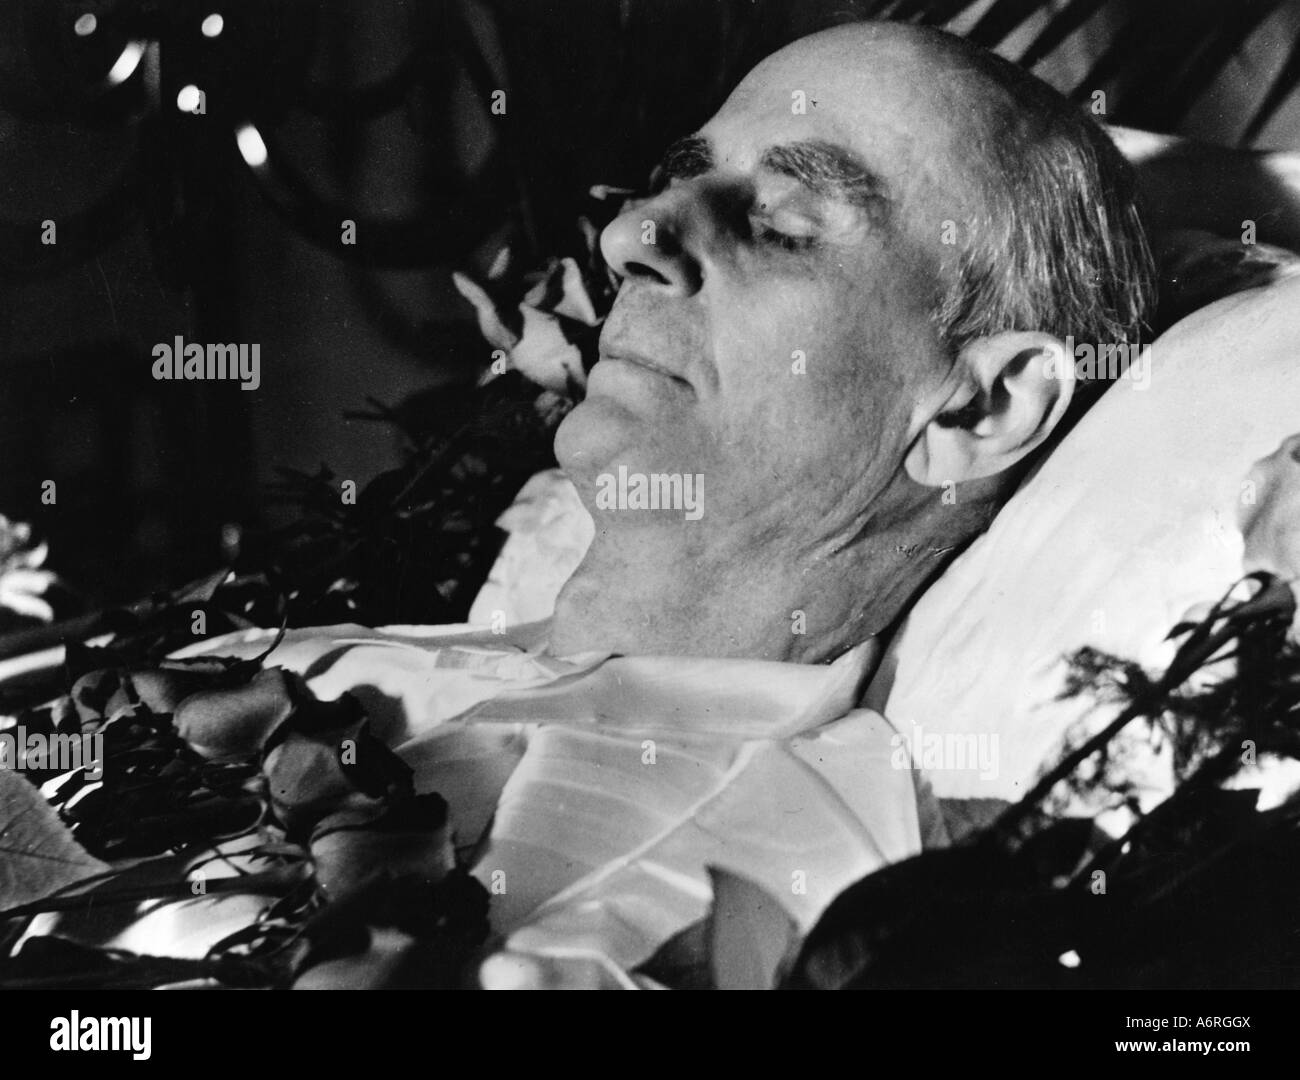 Furtwängler, Wilhelm, 25.1.1886 - 30.11.1954, German conductor & composer, death, layed out on the deathbed, Germany, 20th centu Stock Photo